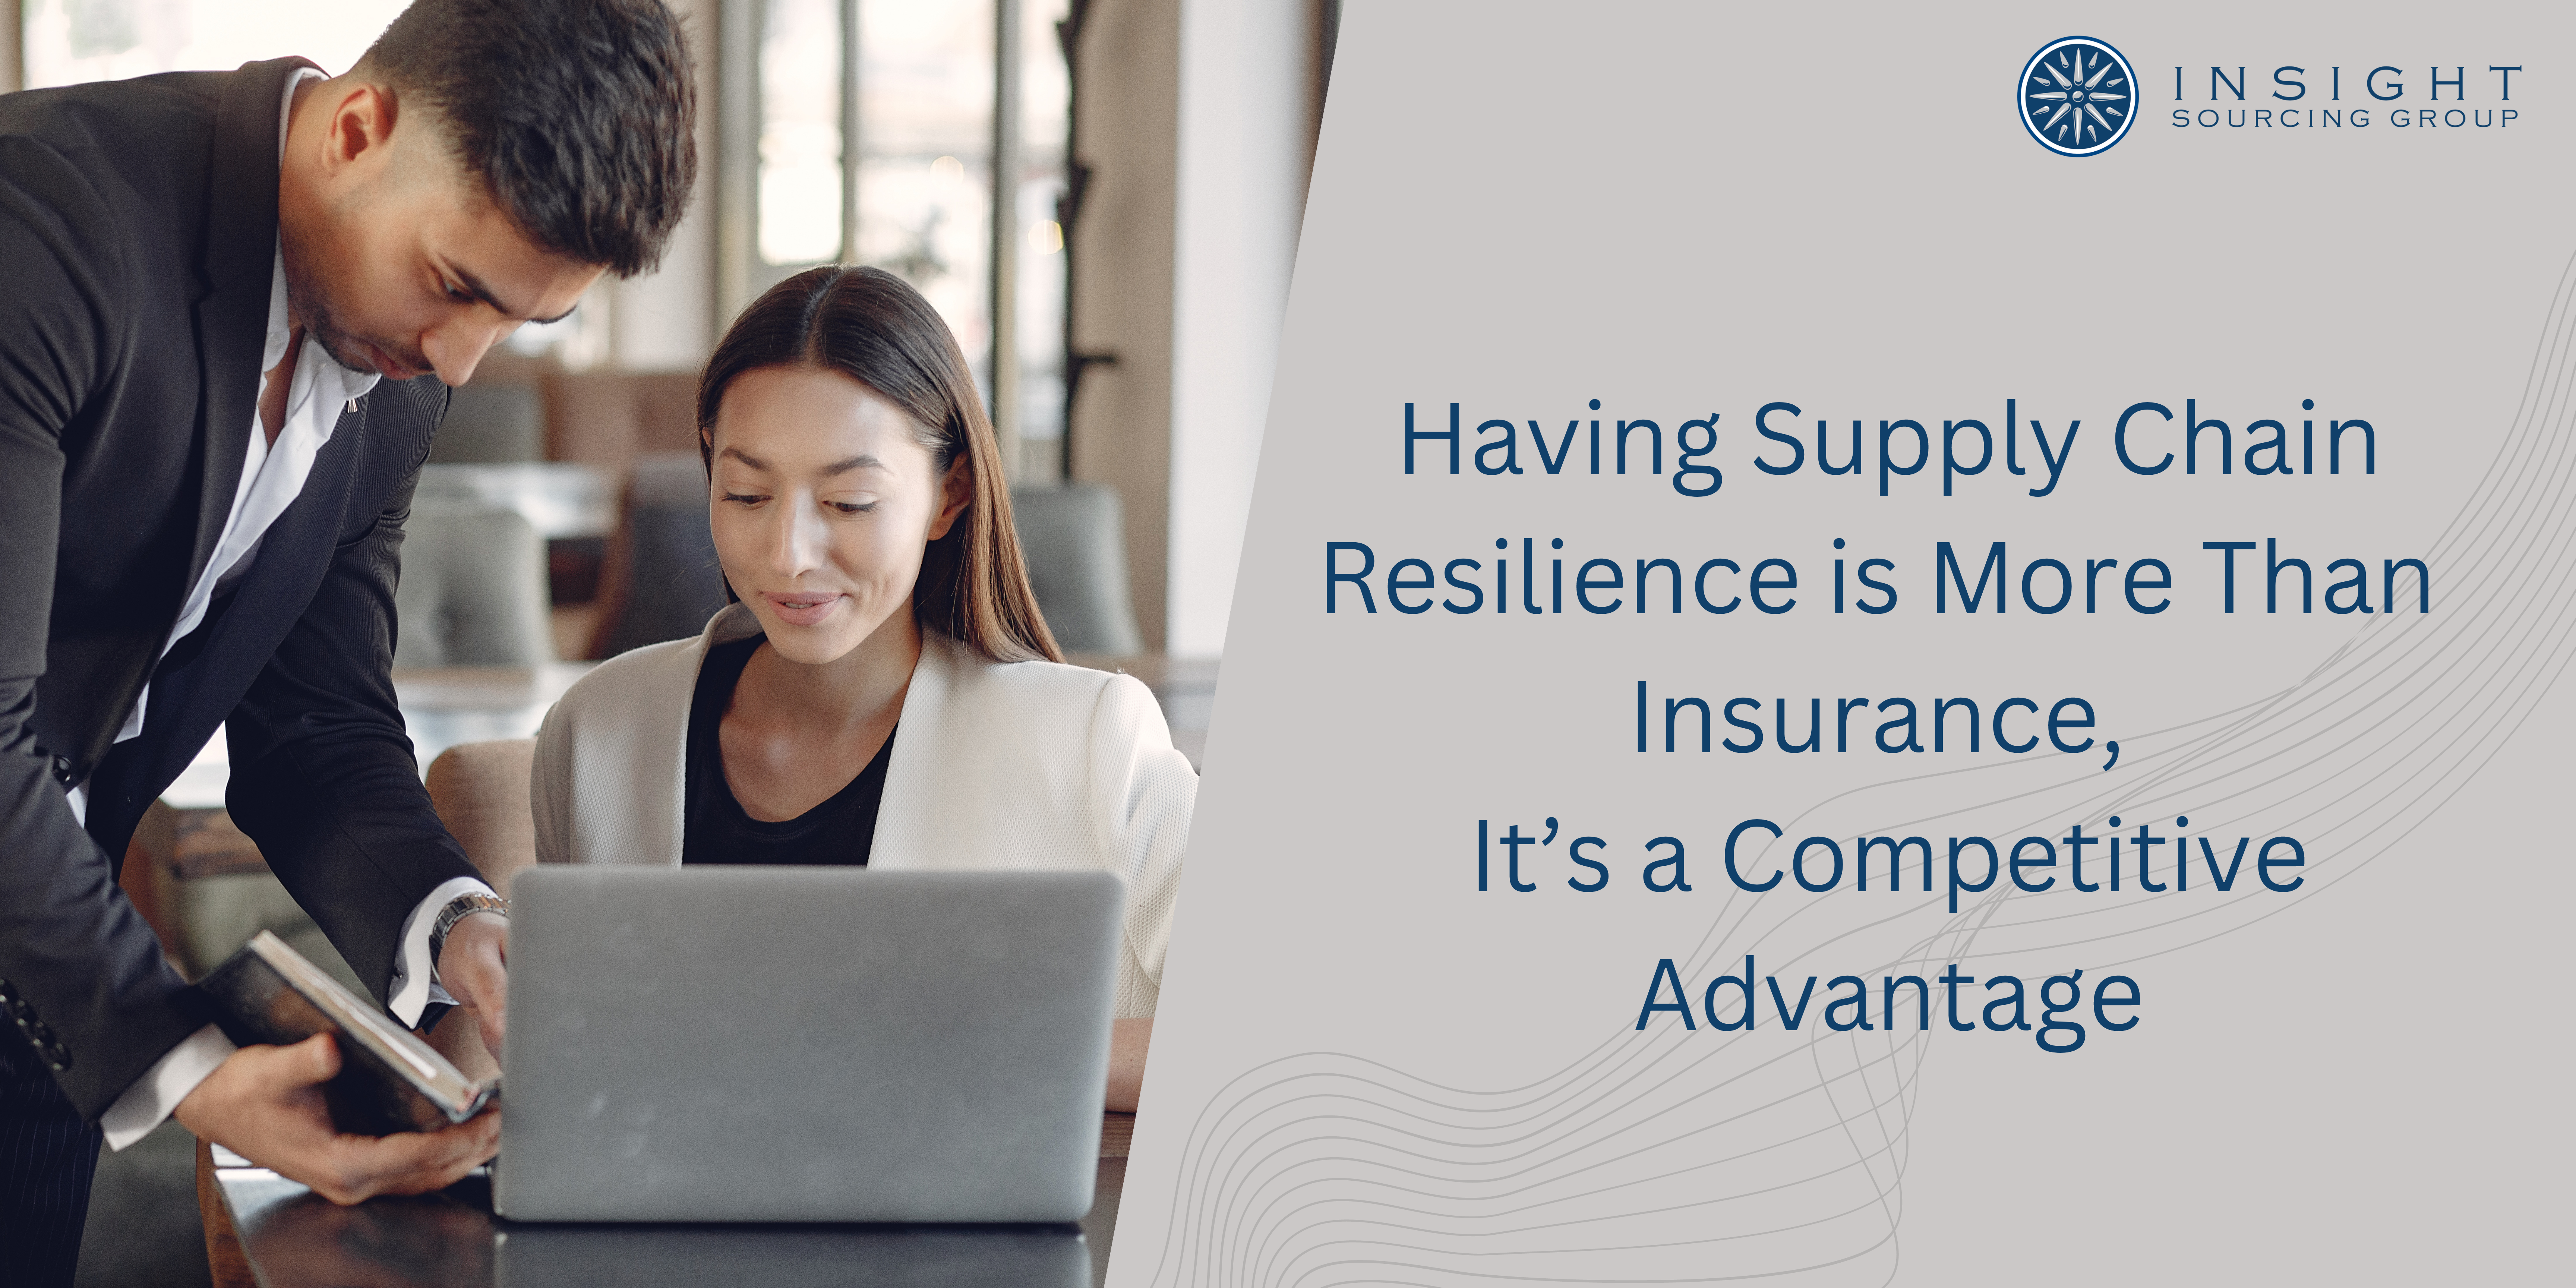 ISG-Blog-Having-Supply-Chain-Resilience-is-More-Than-Insurance-it’s-a-Competitive-Advantage